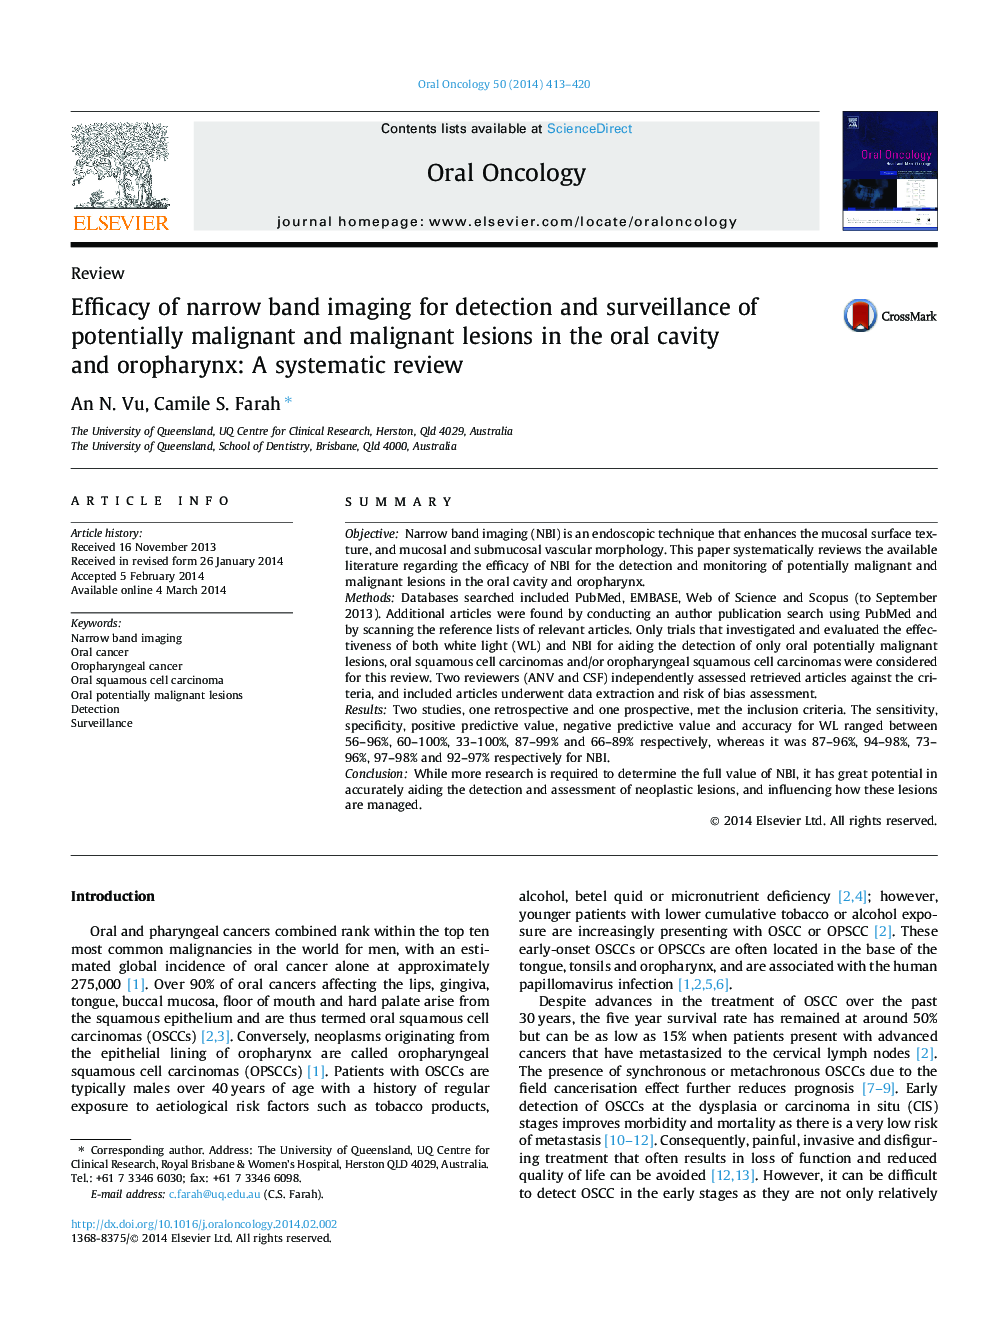 Efficacy of narrow band imaging for detection and surveillance of potentially malignant and malignant lesions in the oral cavity and oropharynx: A systematic review